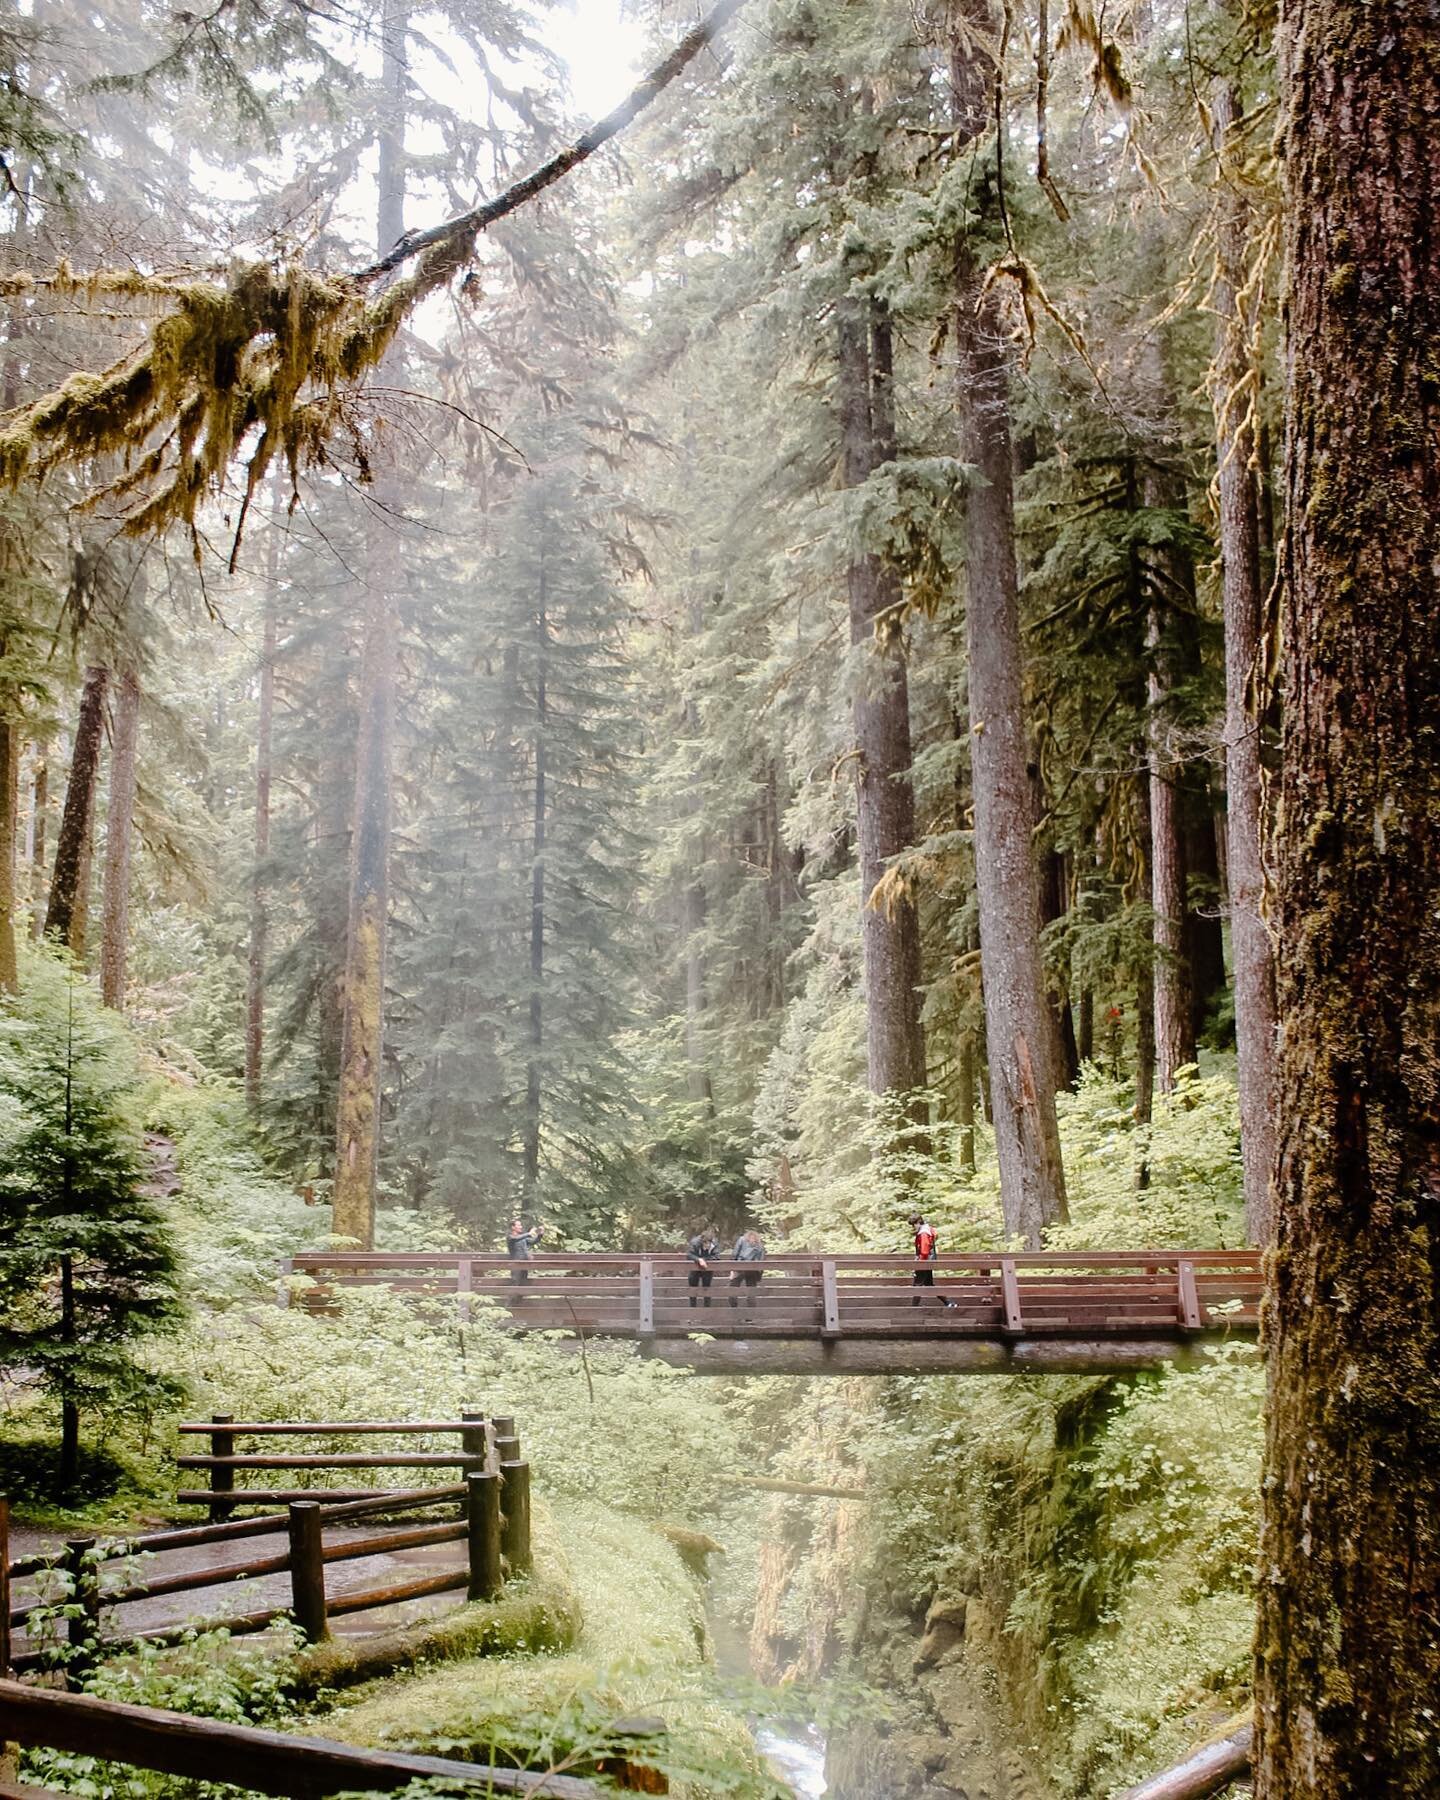 With Olympic National Park being as diverse as it is, the Hoh rainforest is just one amazing part of it.

Suspended 50ft above the thundering falls below, you are able to see cutthroat and steelhead salmon in the fall and winter from the bridge. This